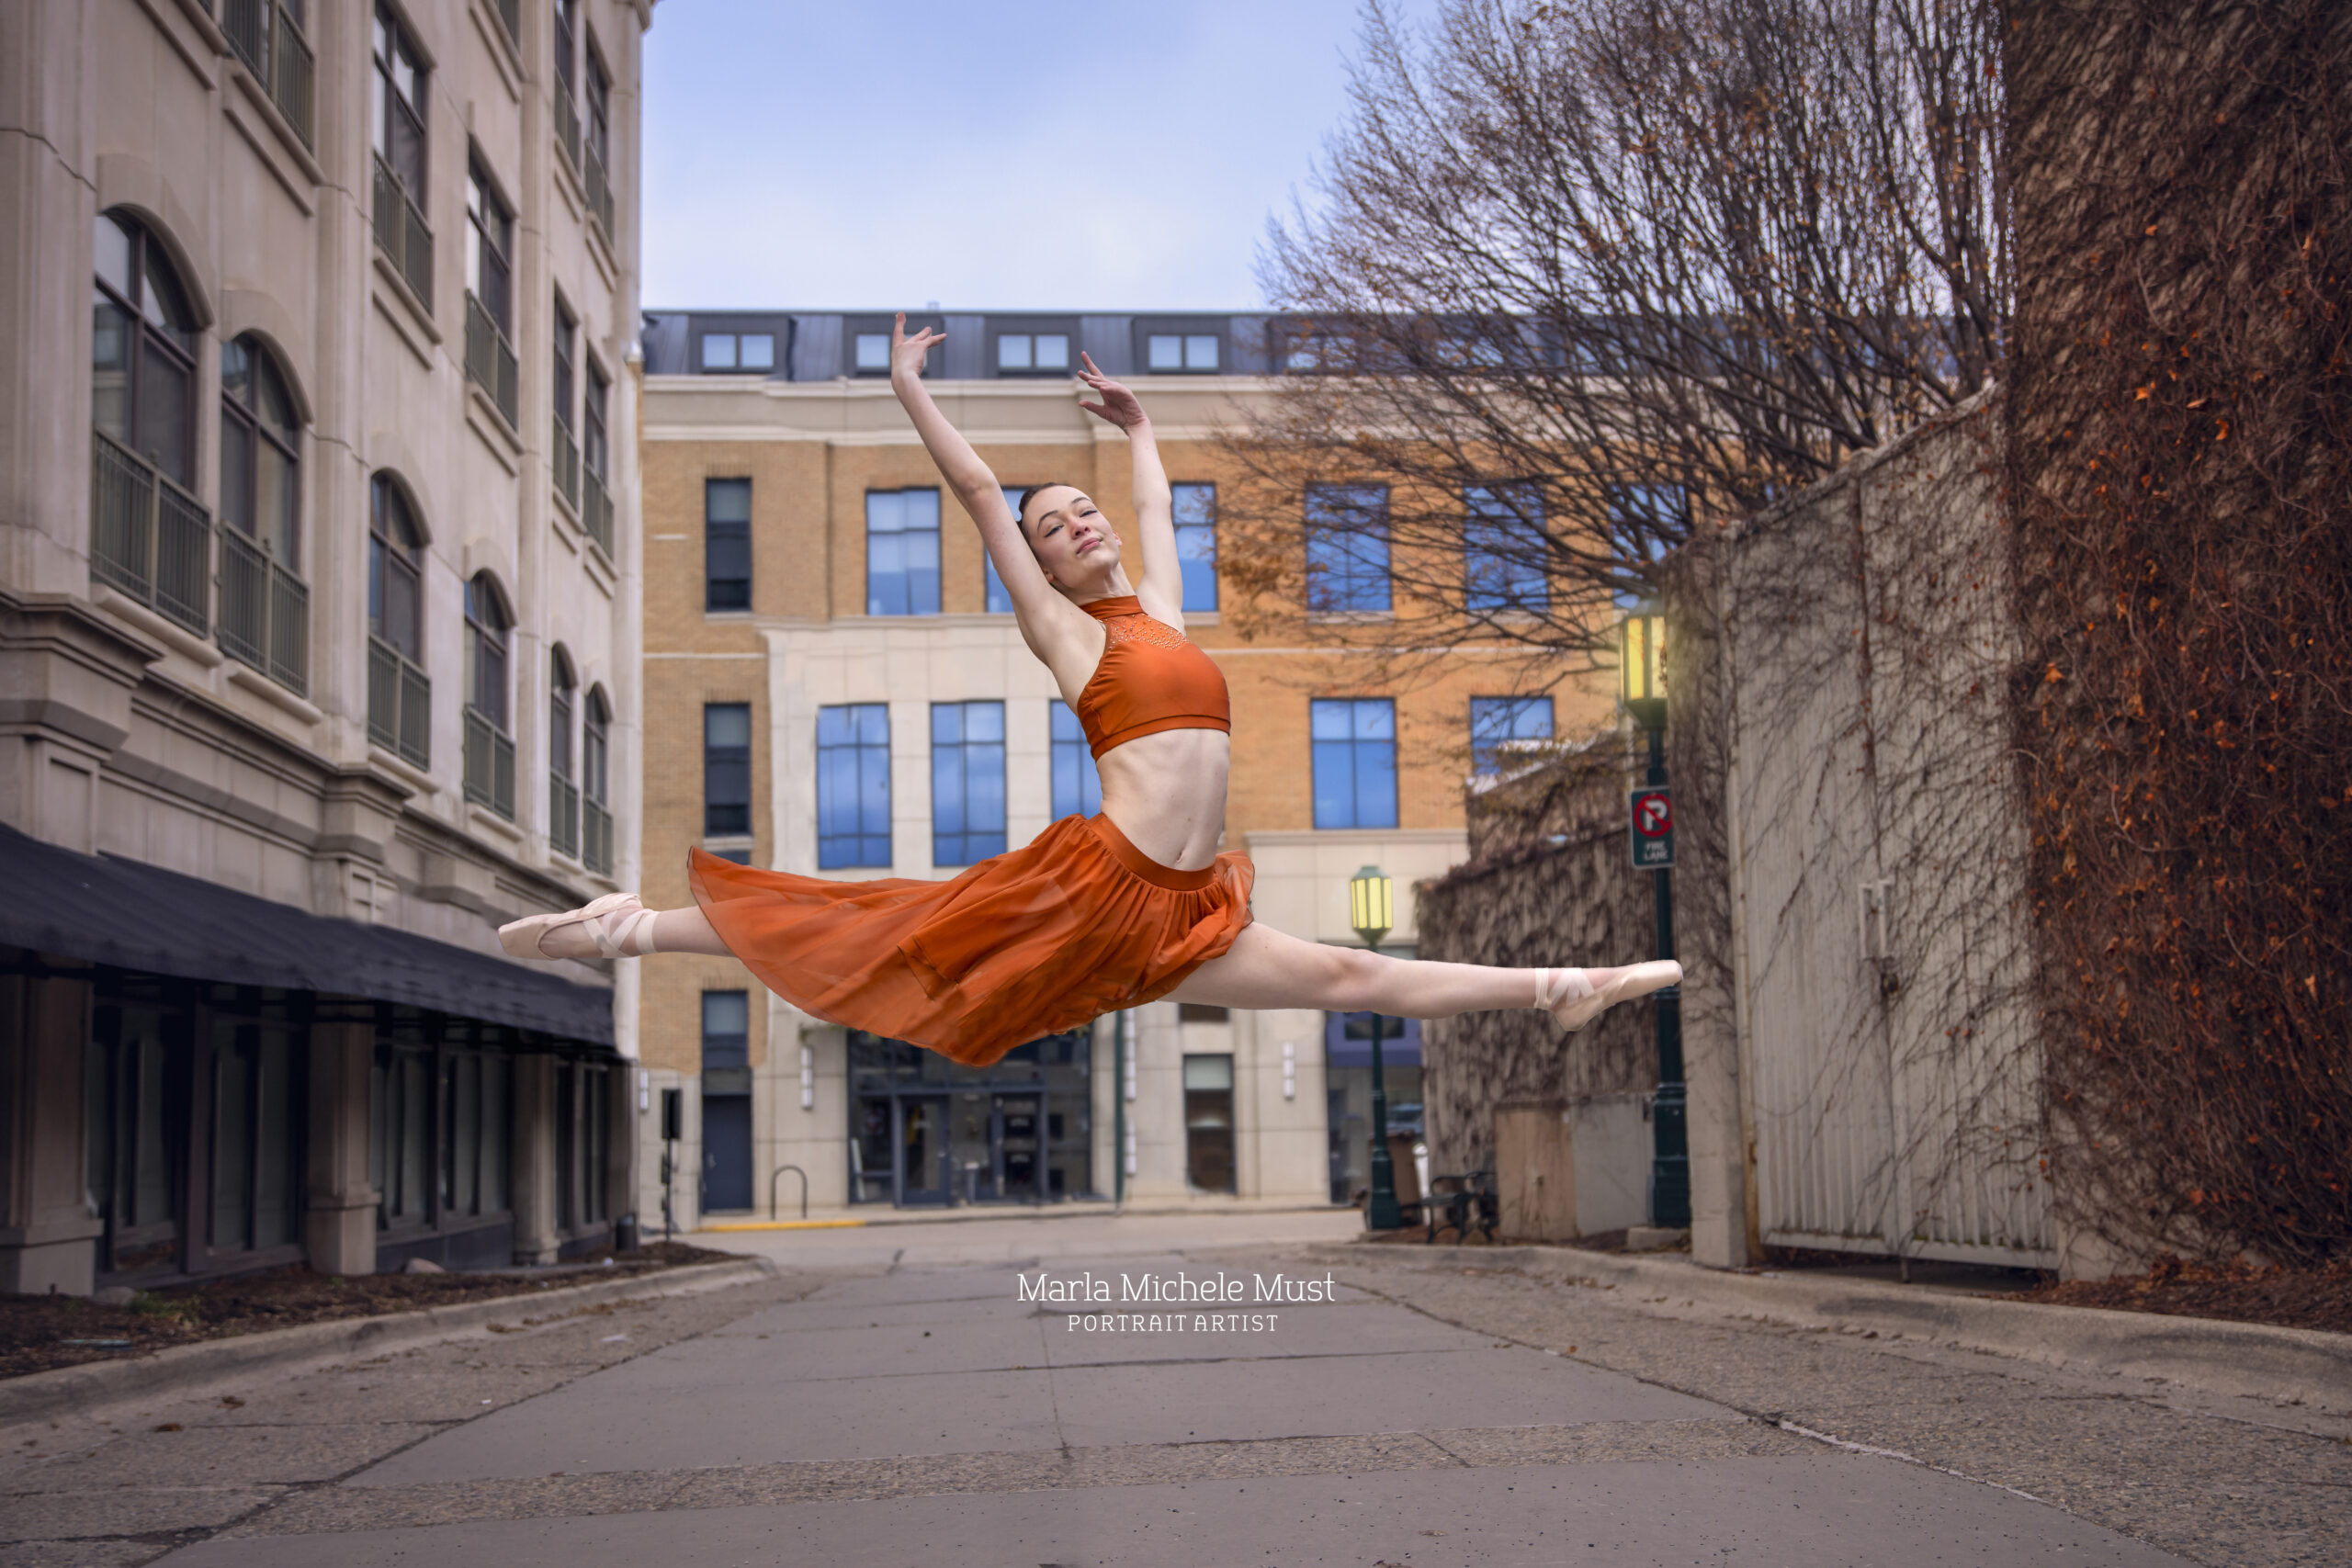 Skilled dancer wearing coordinating orange satin two-piece outfit exhibits ethereal grace with a soaring leap, beautifully photographed by a Detroit-based portrait photographer.